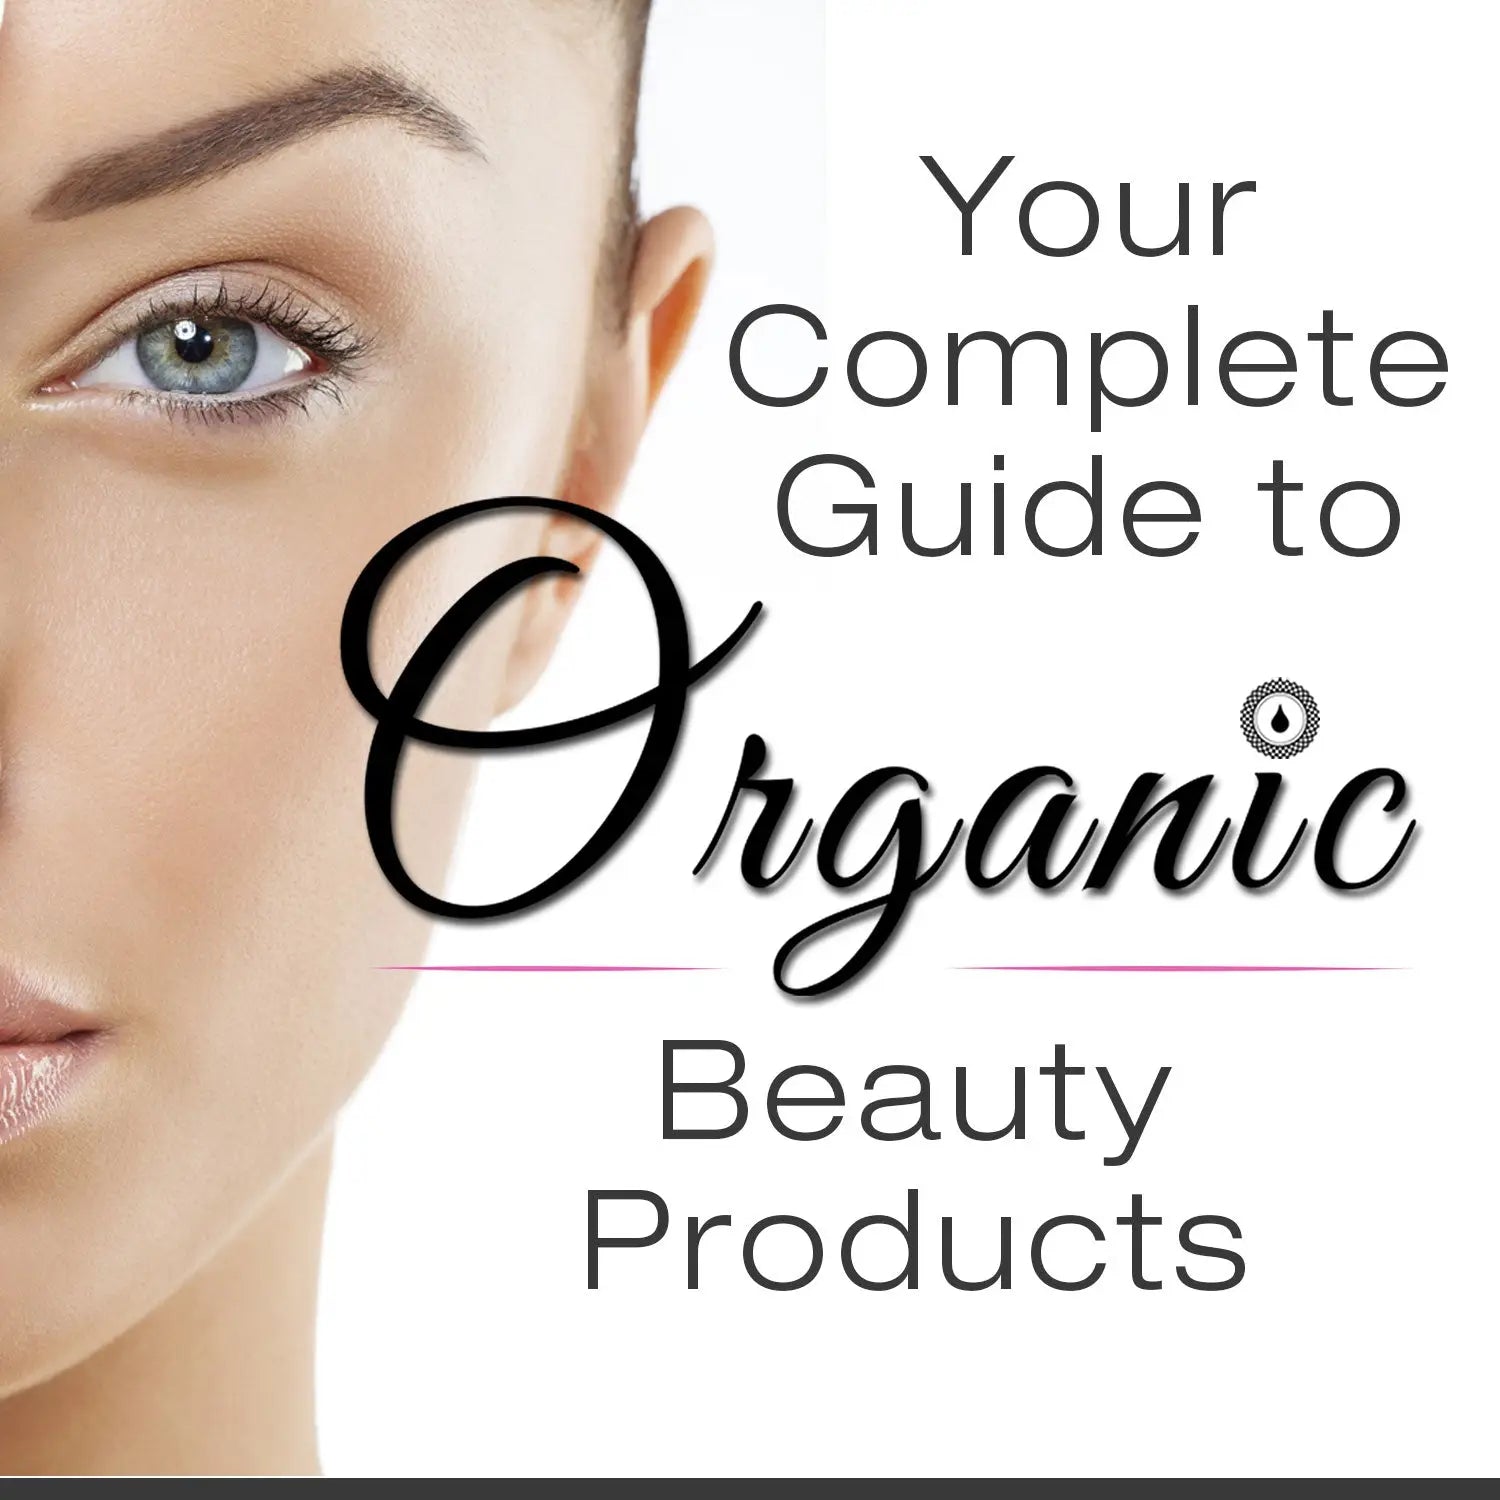 YOUR COMPLETE GUIDE TO ORGANIC BEAUTY PRODUCTS